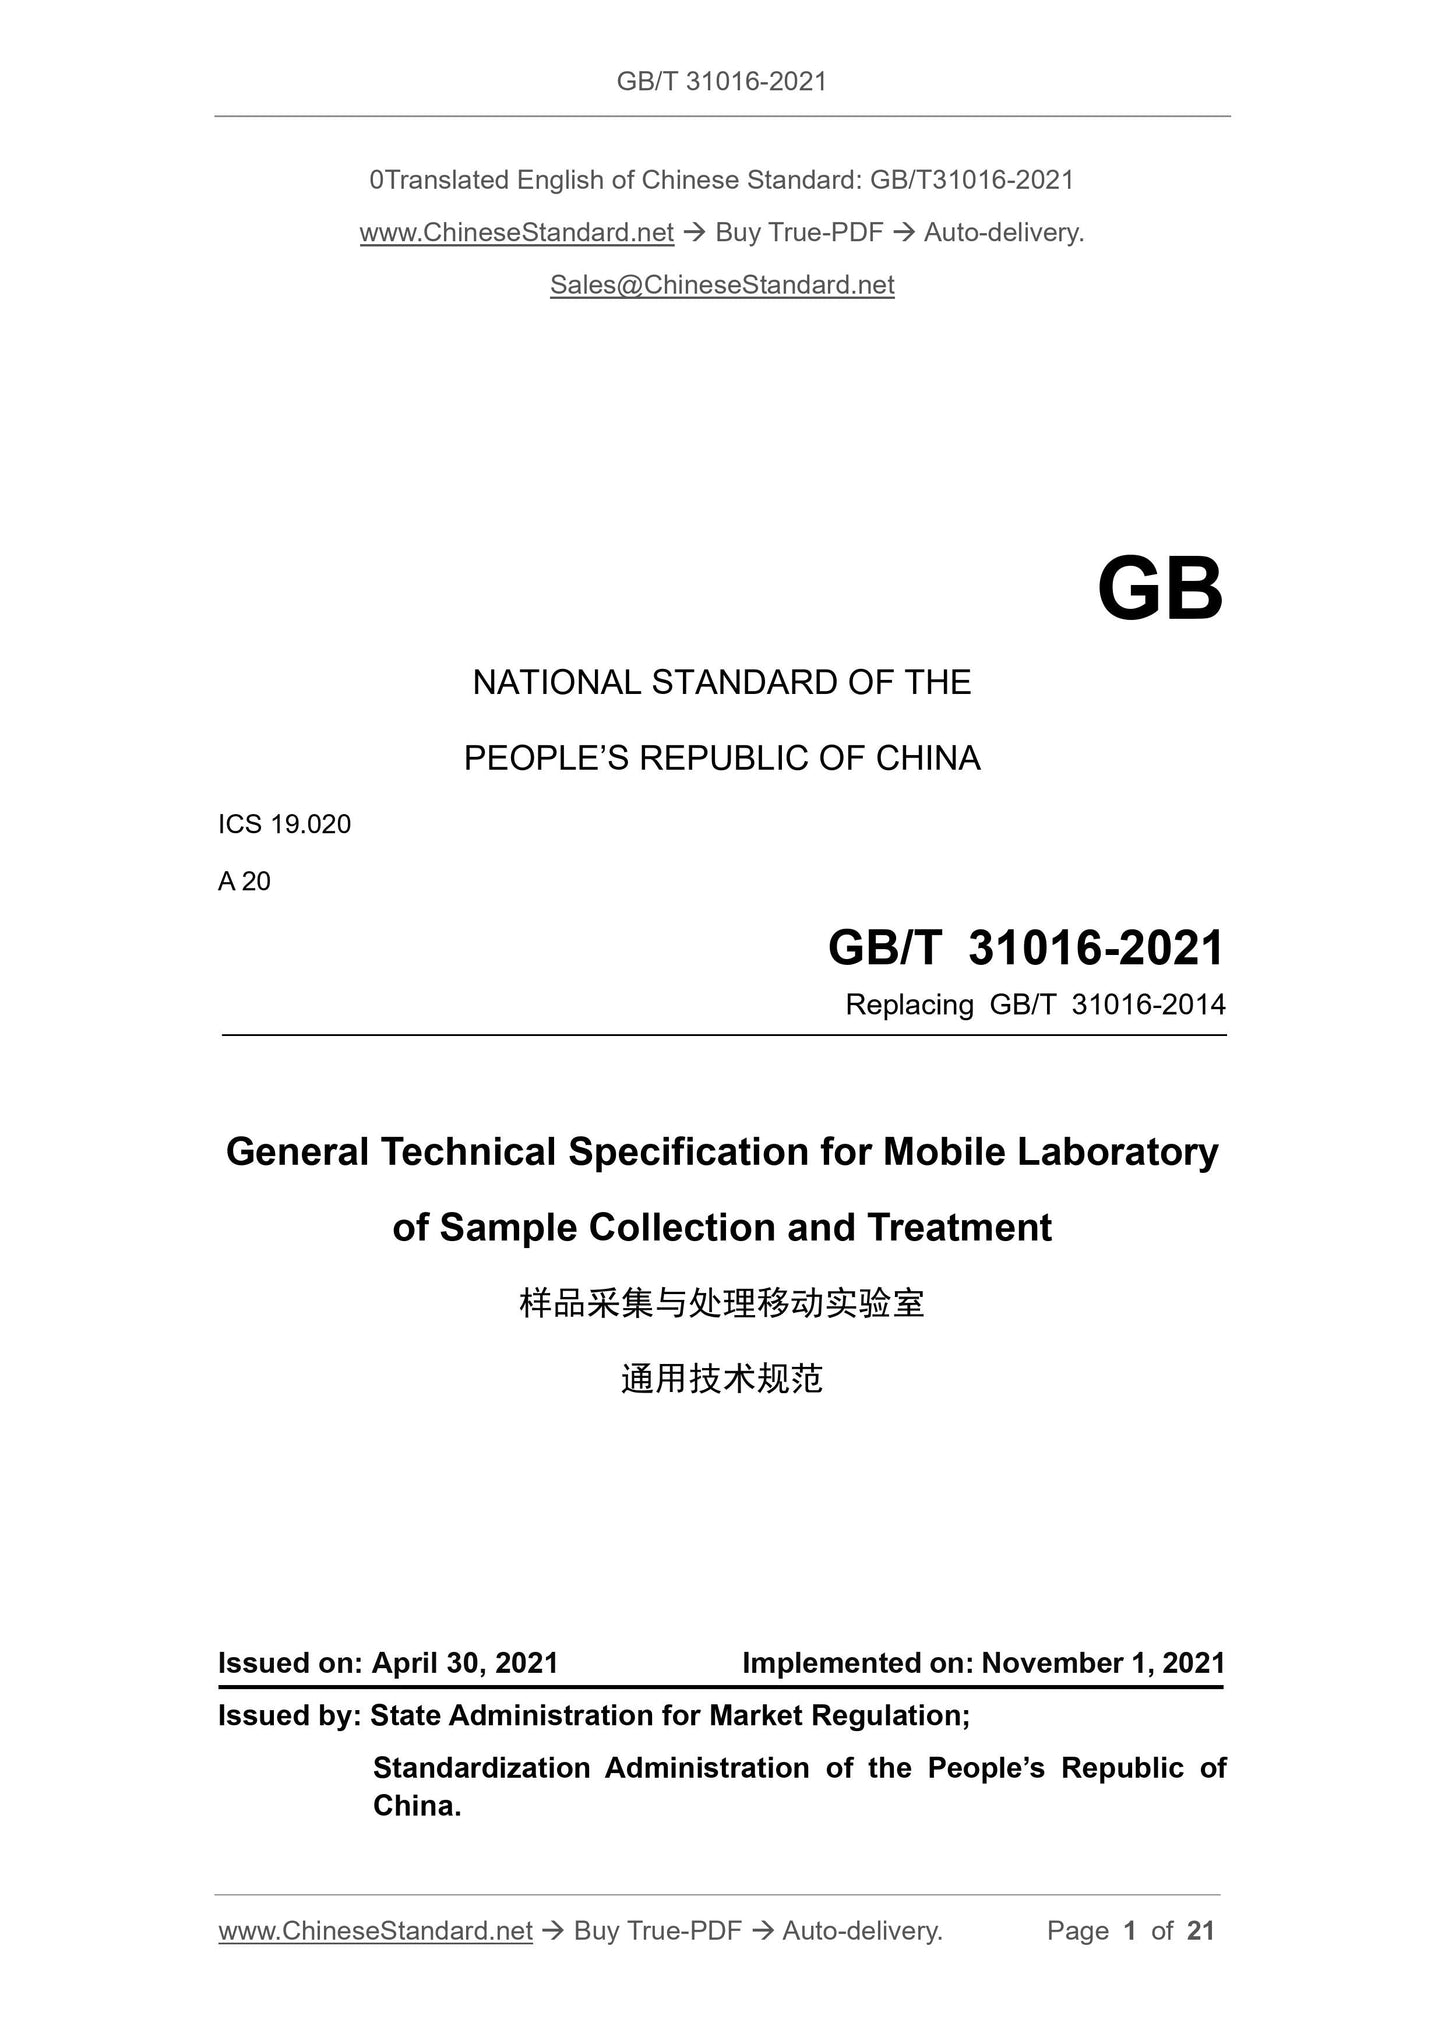 GB/T 31016-2021 Page 1